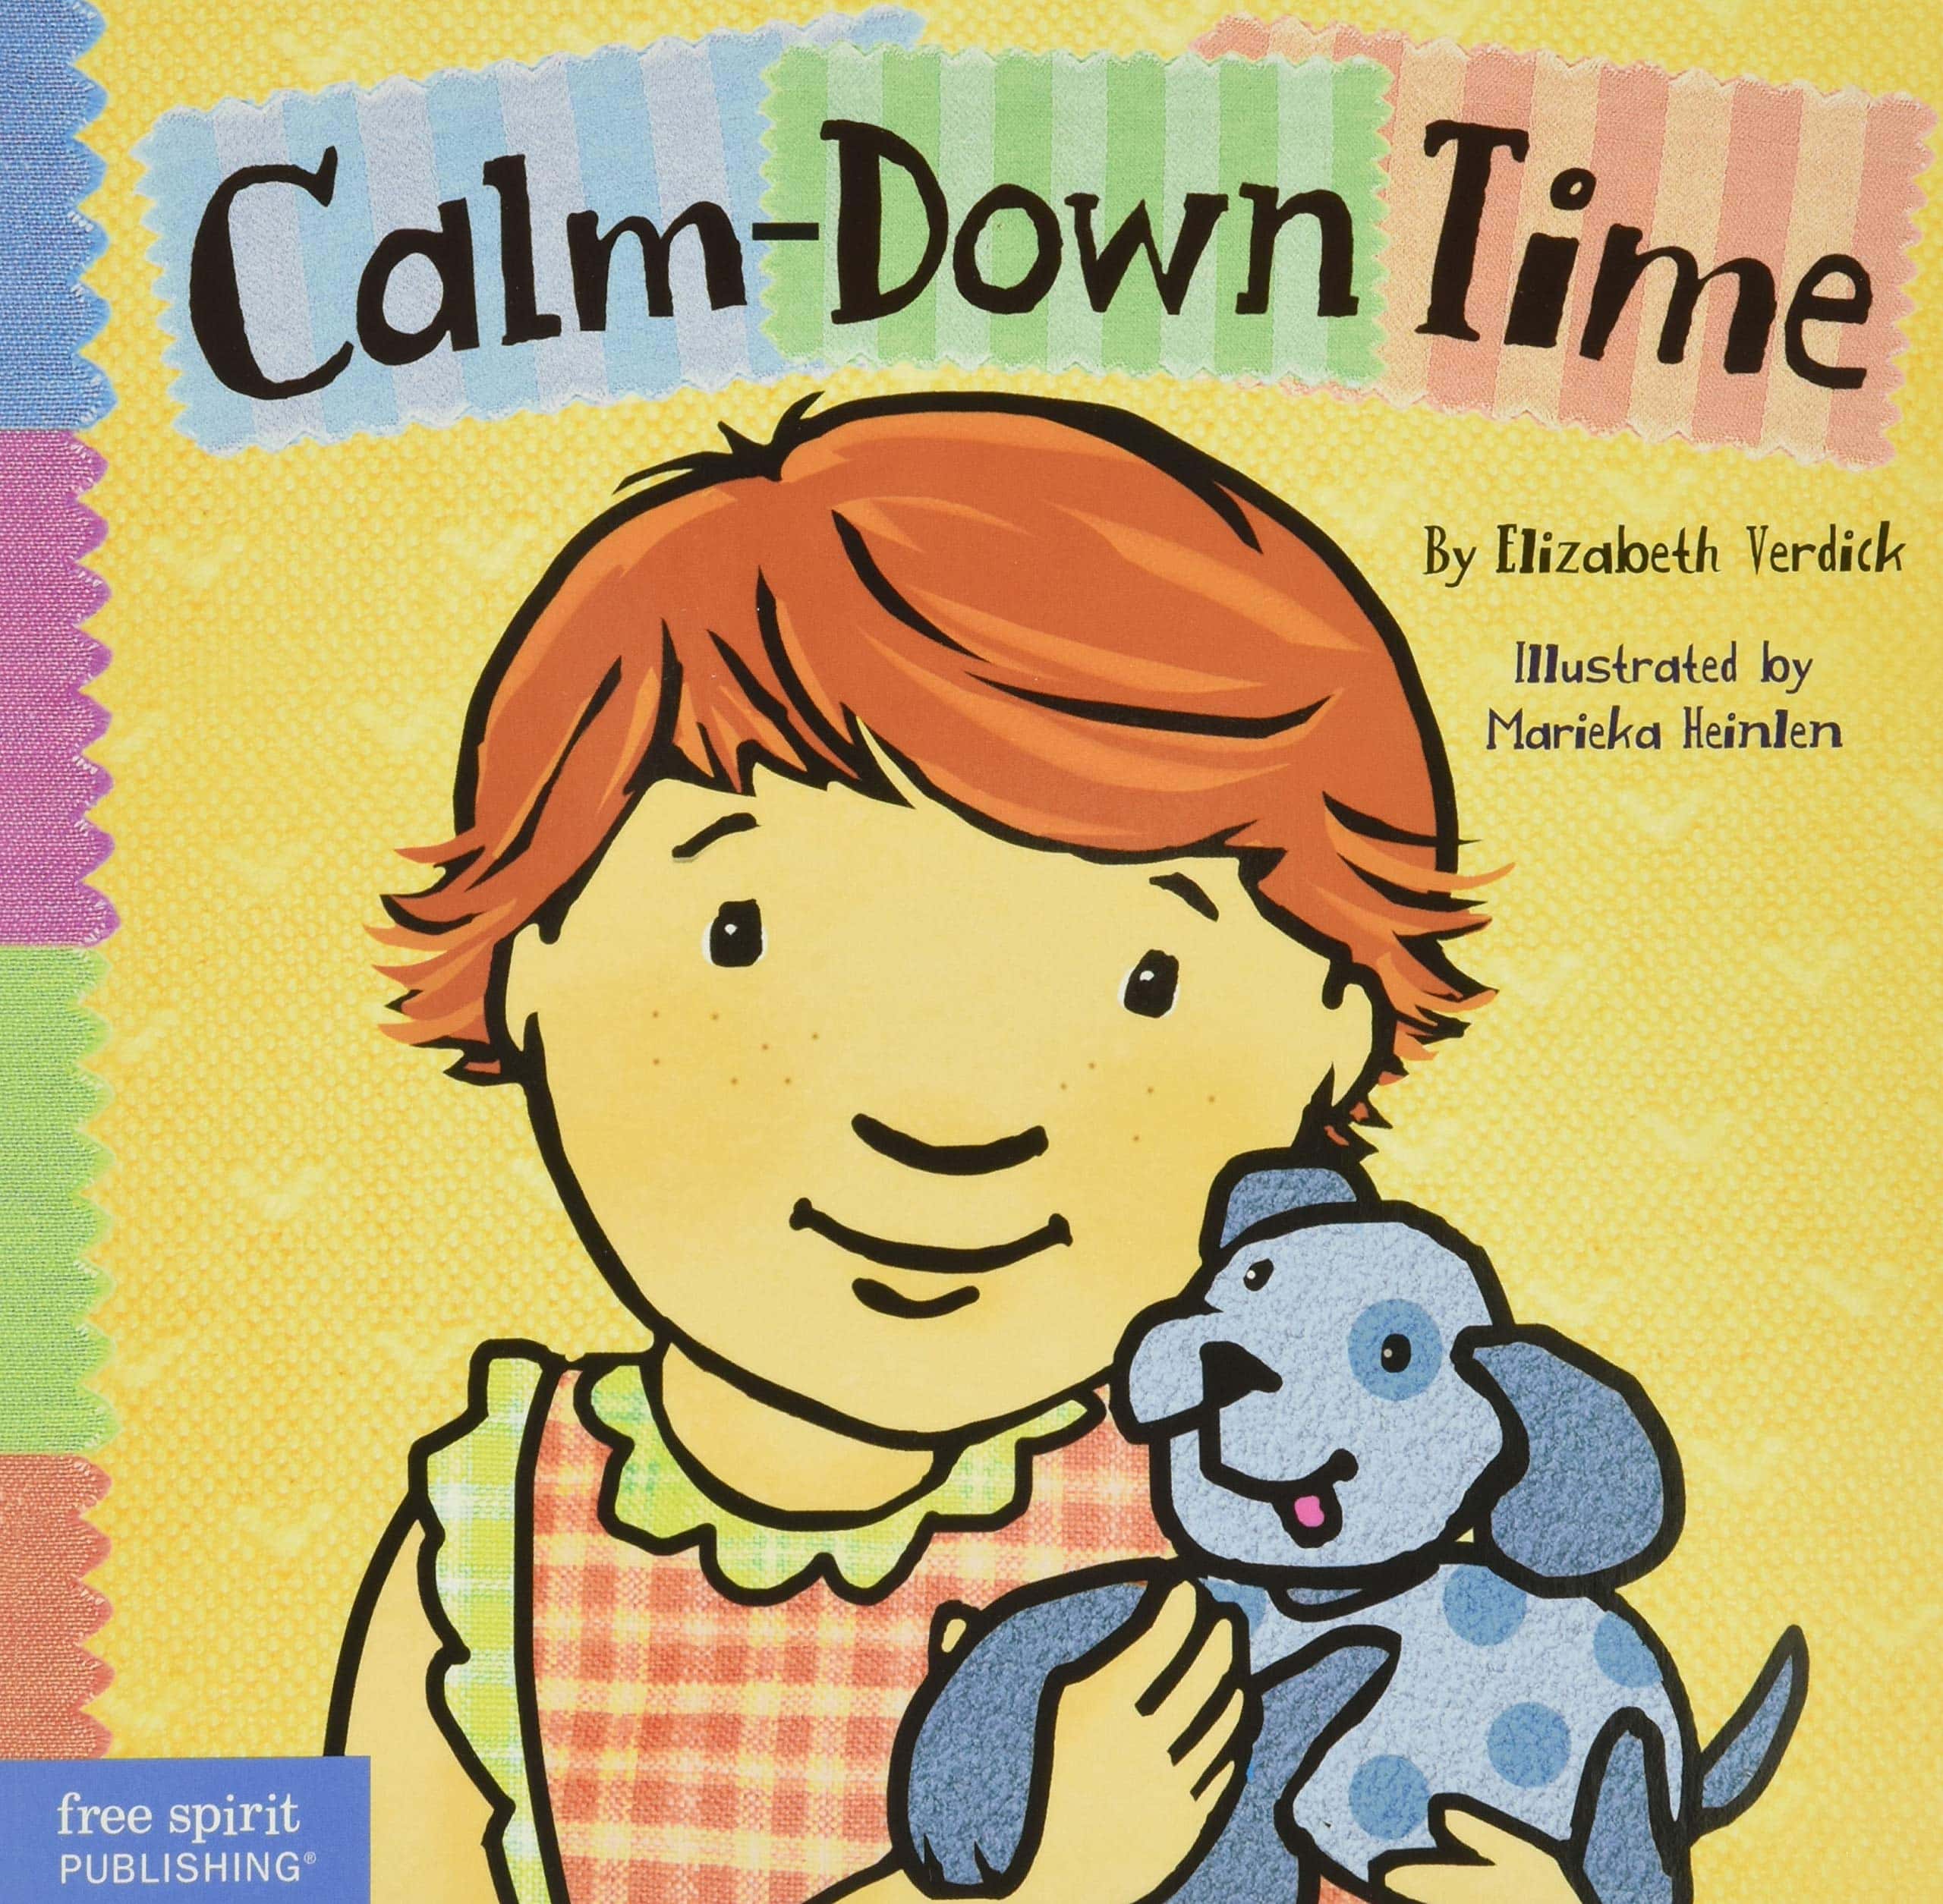 Calm-Down Time book cover